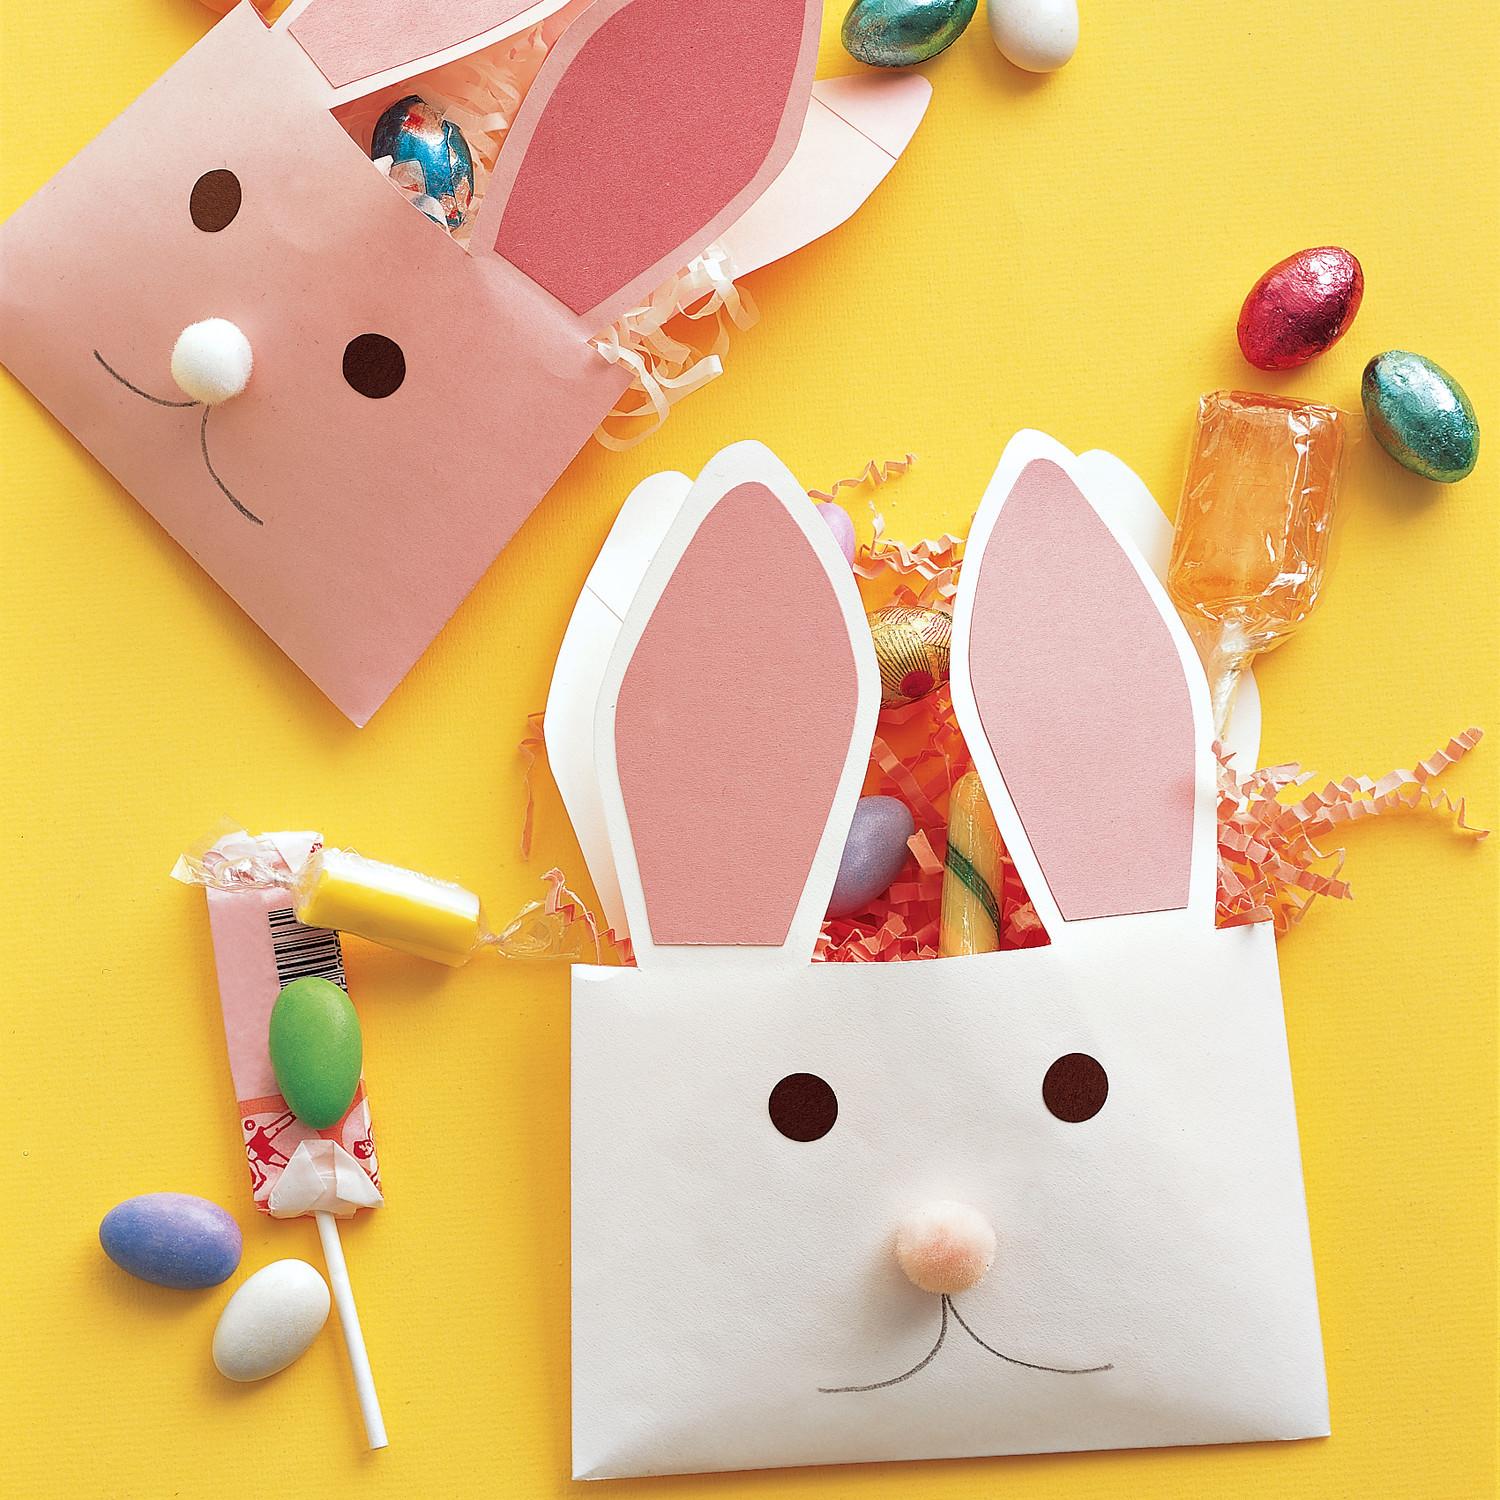 Easter Ideas For Preschoolers
 The Best Easter Crafts and Activities for Kids